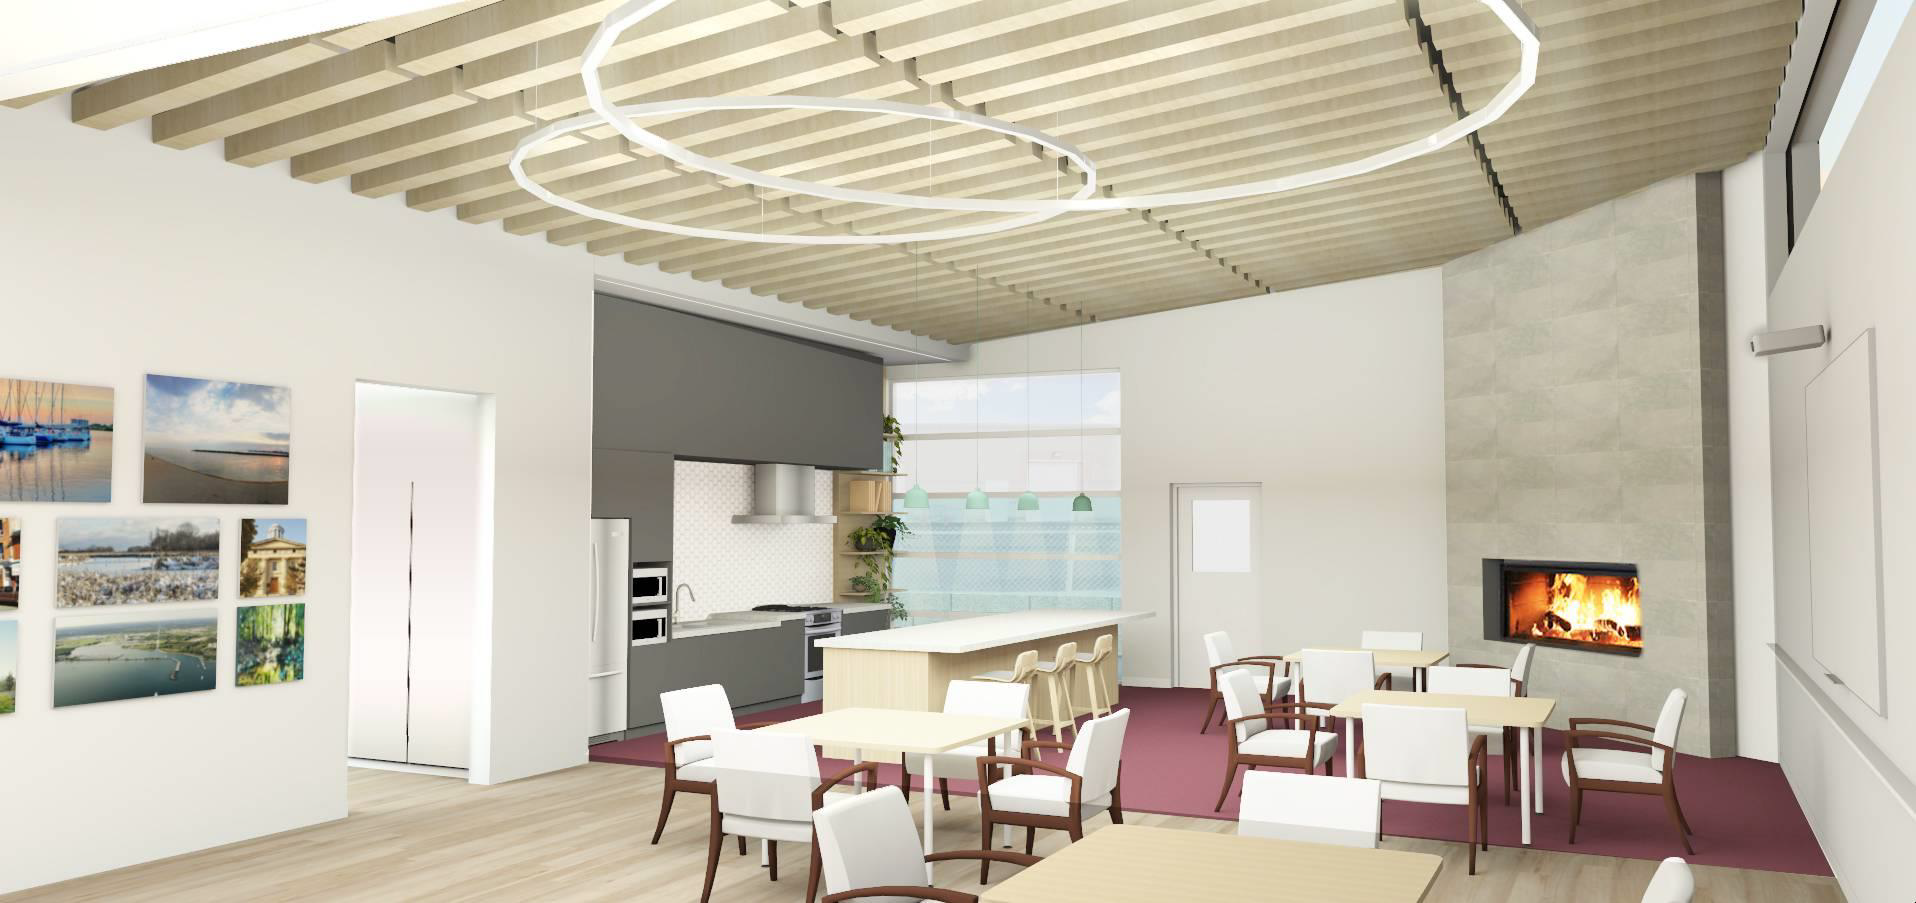 Interior rendering of the updated Adult Day Program kitchen. Rendering done by k2 designworks.